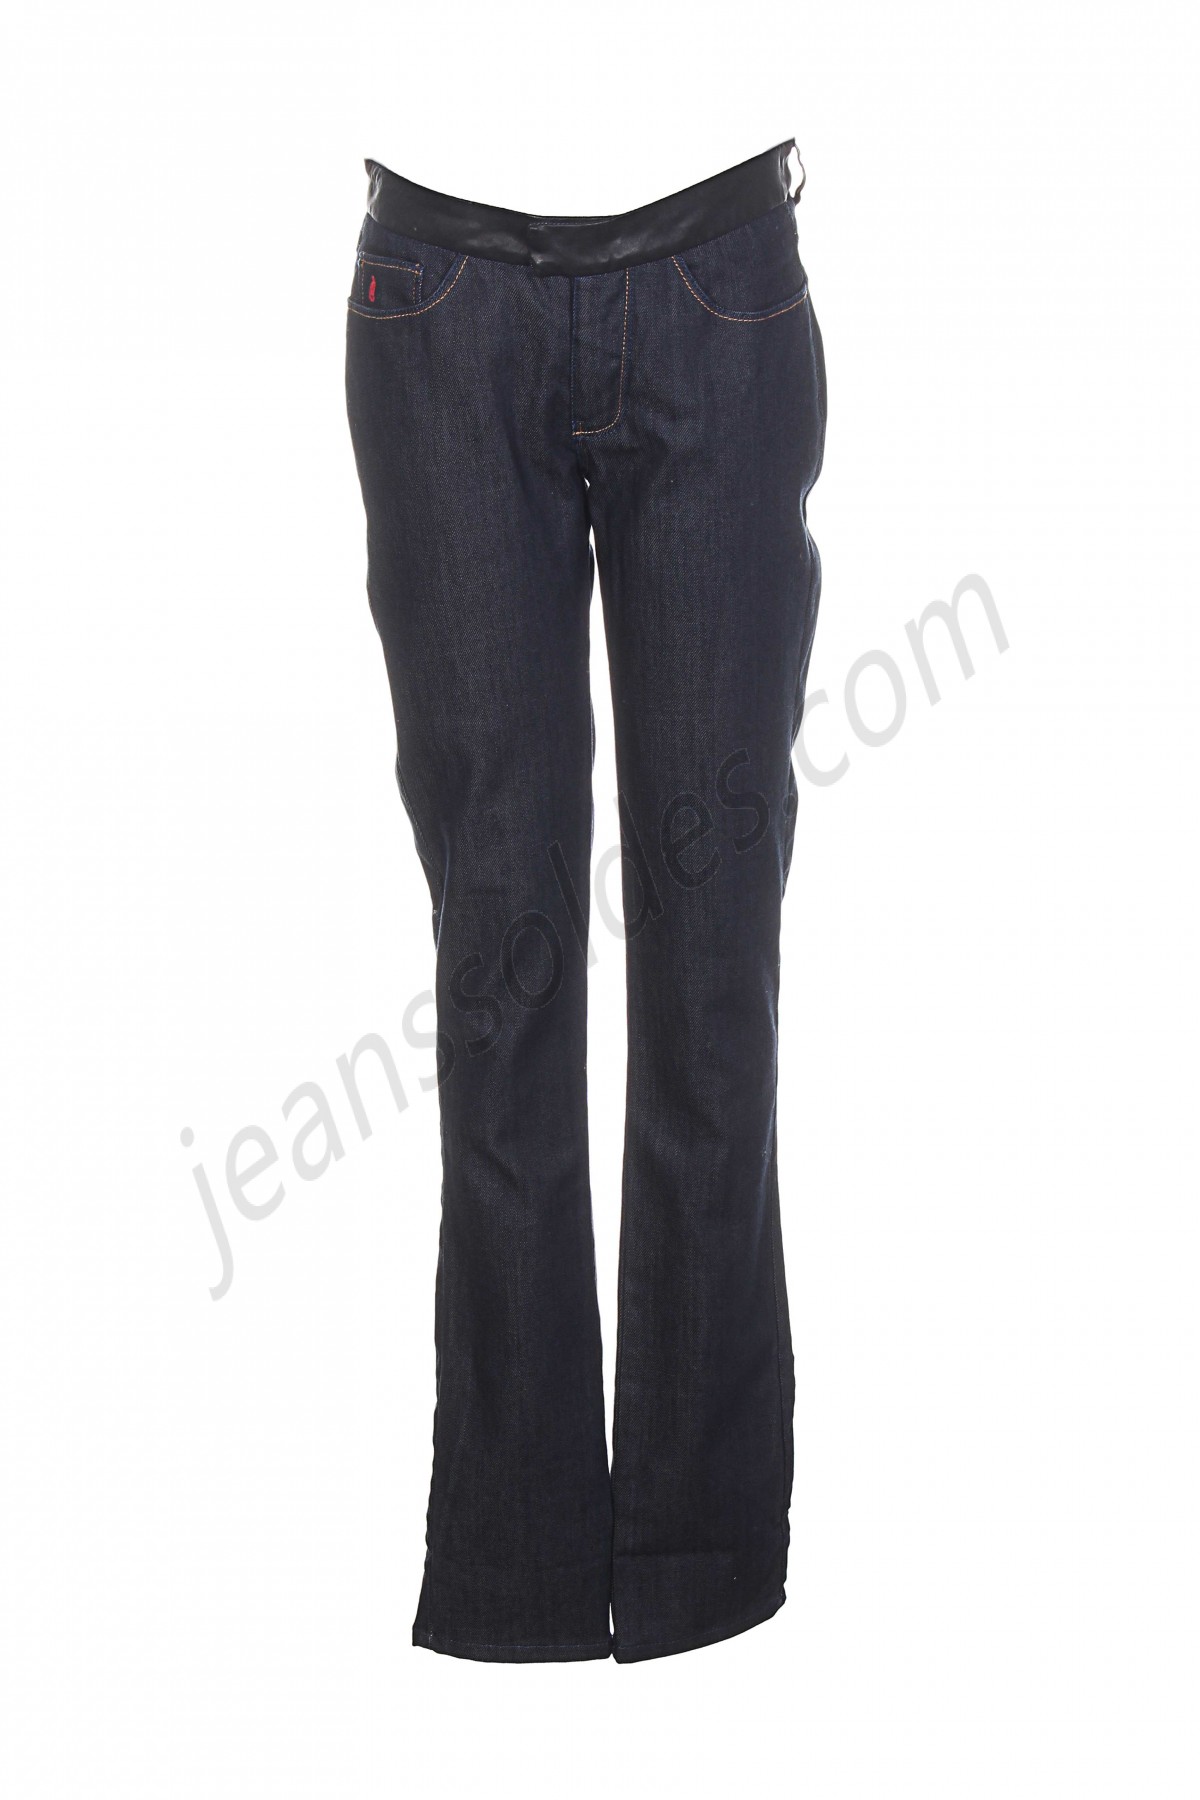 i.code (by ikks)-Jeans coupe slim prix d’amis - -0